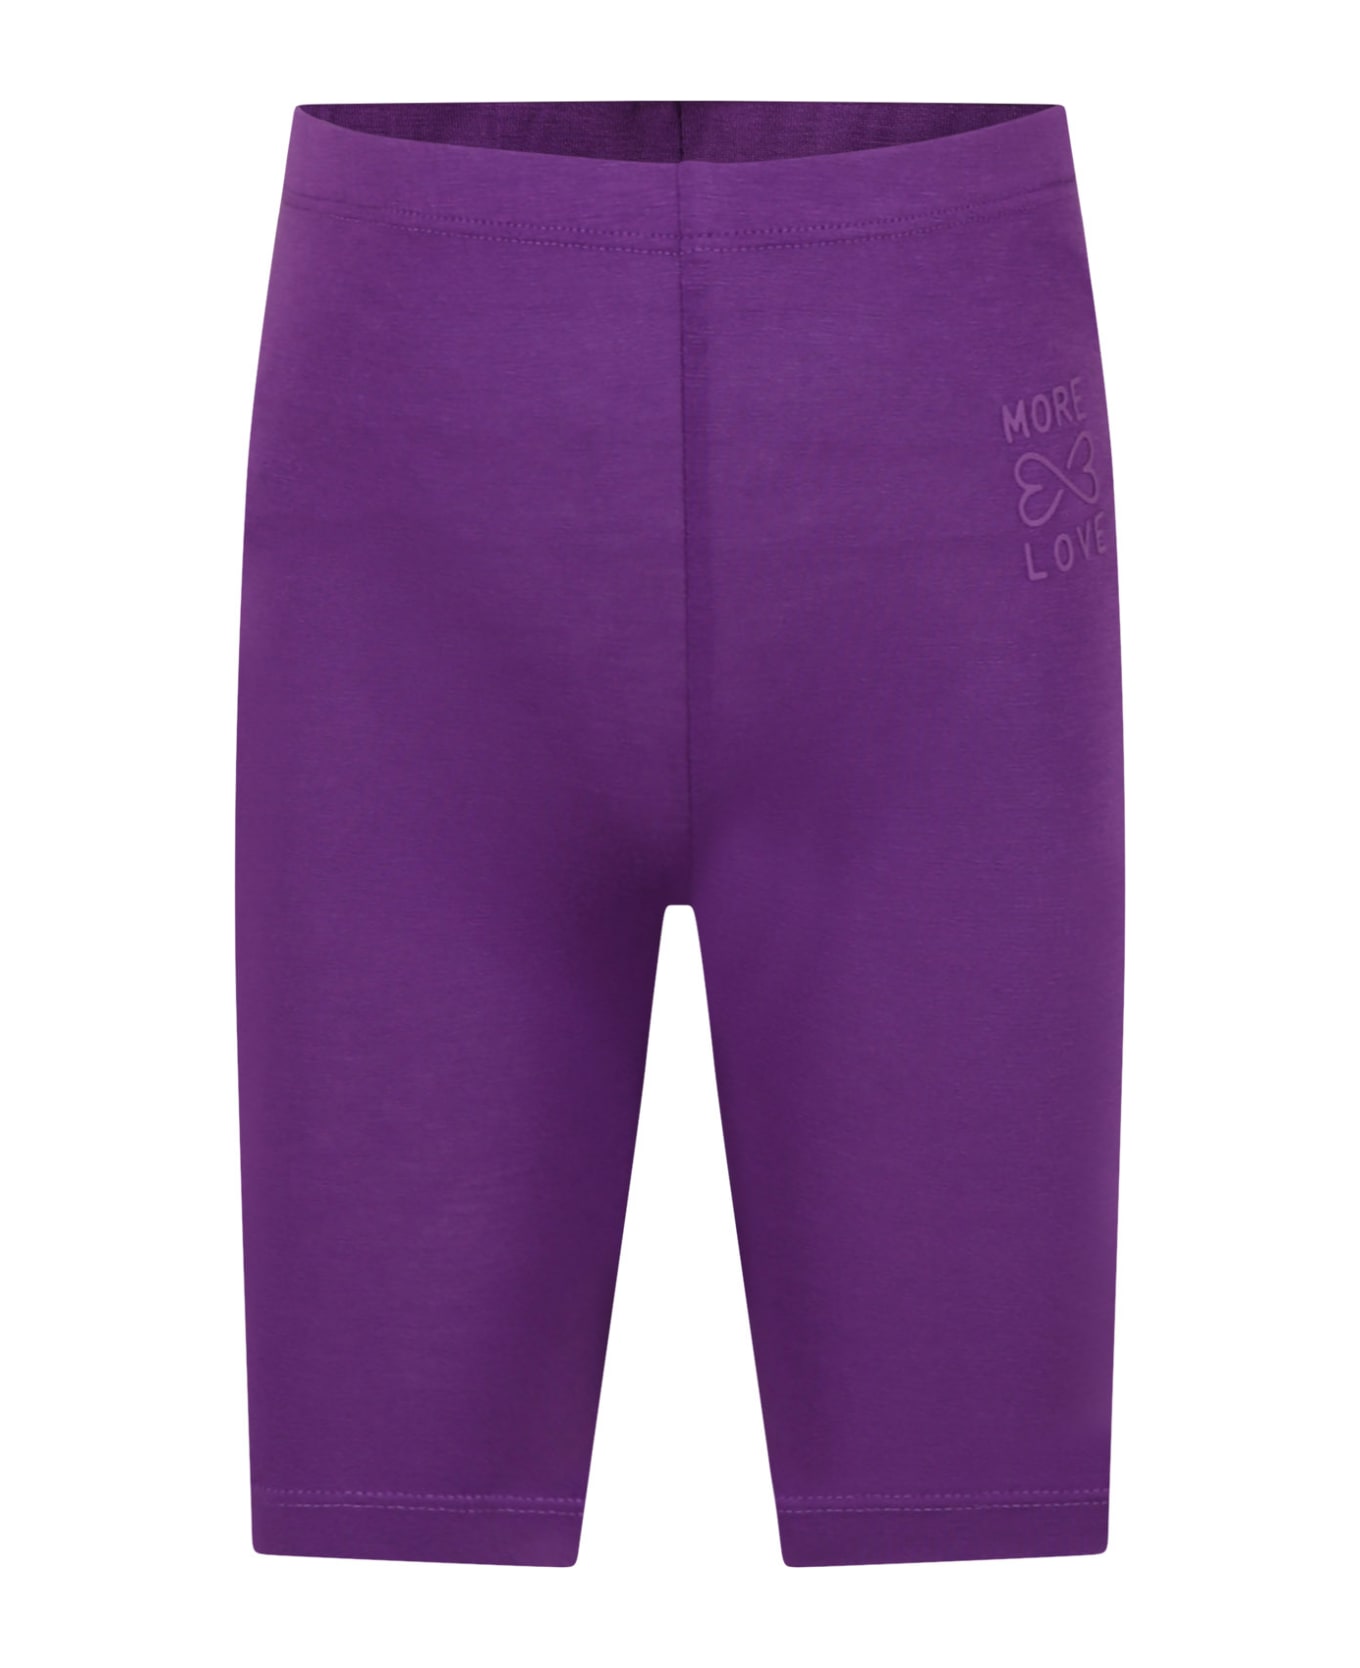 Molo Purple Leggings For Girl With Writing - Violet ボトムス